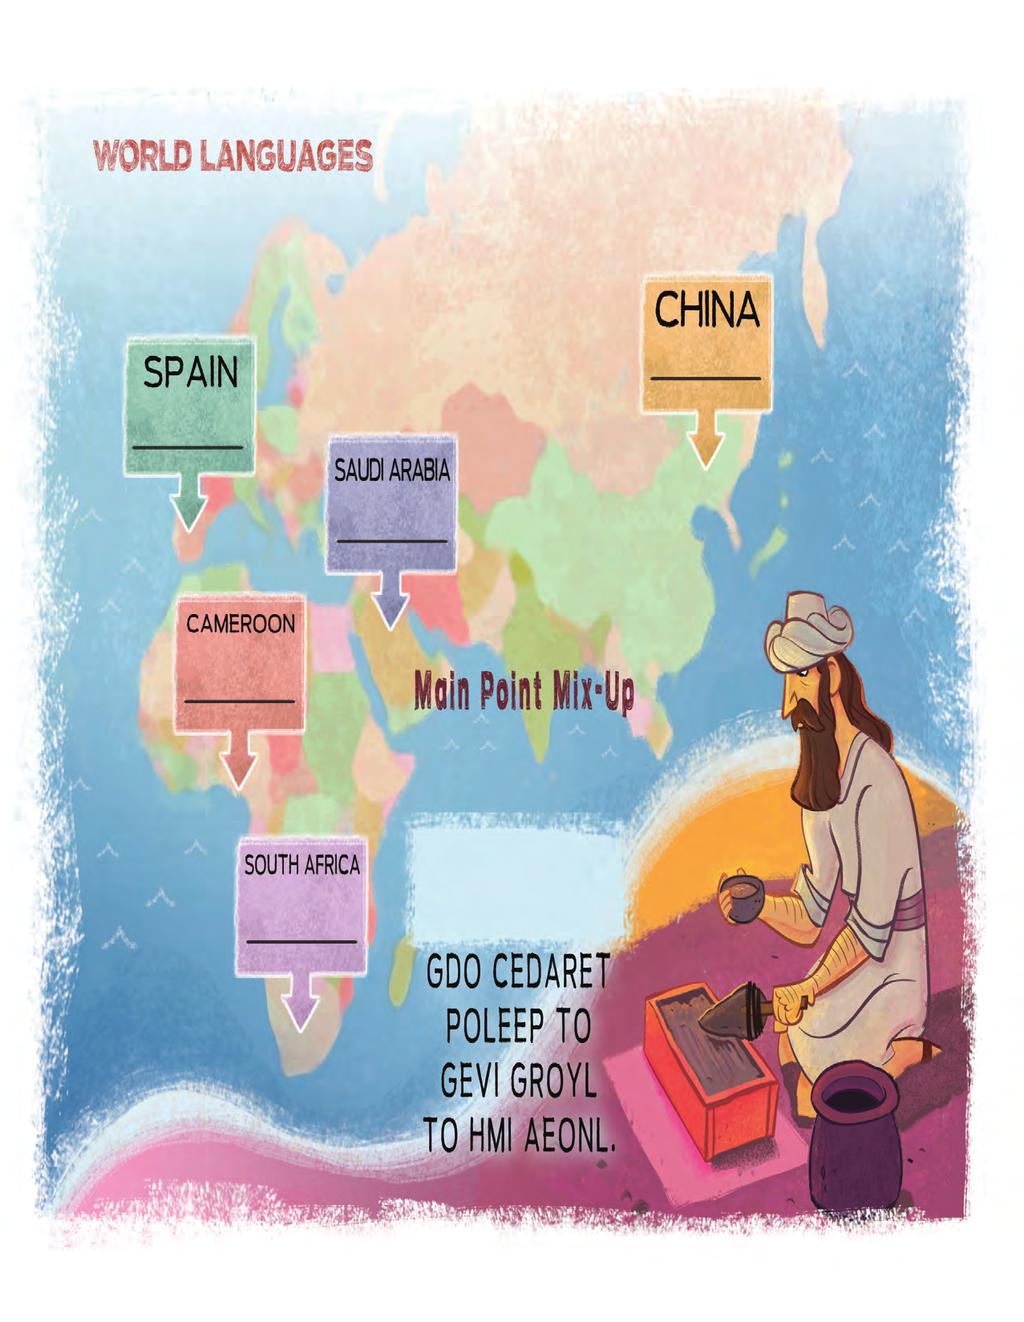 Can you guess the official languages of these countries? Write the language below the country's name.